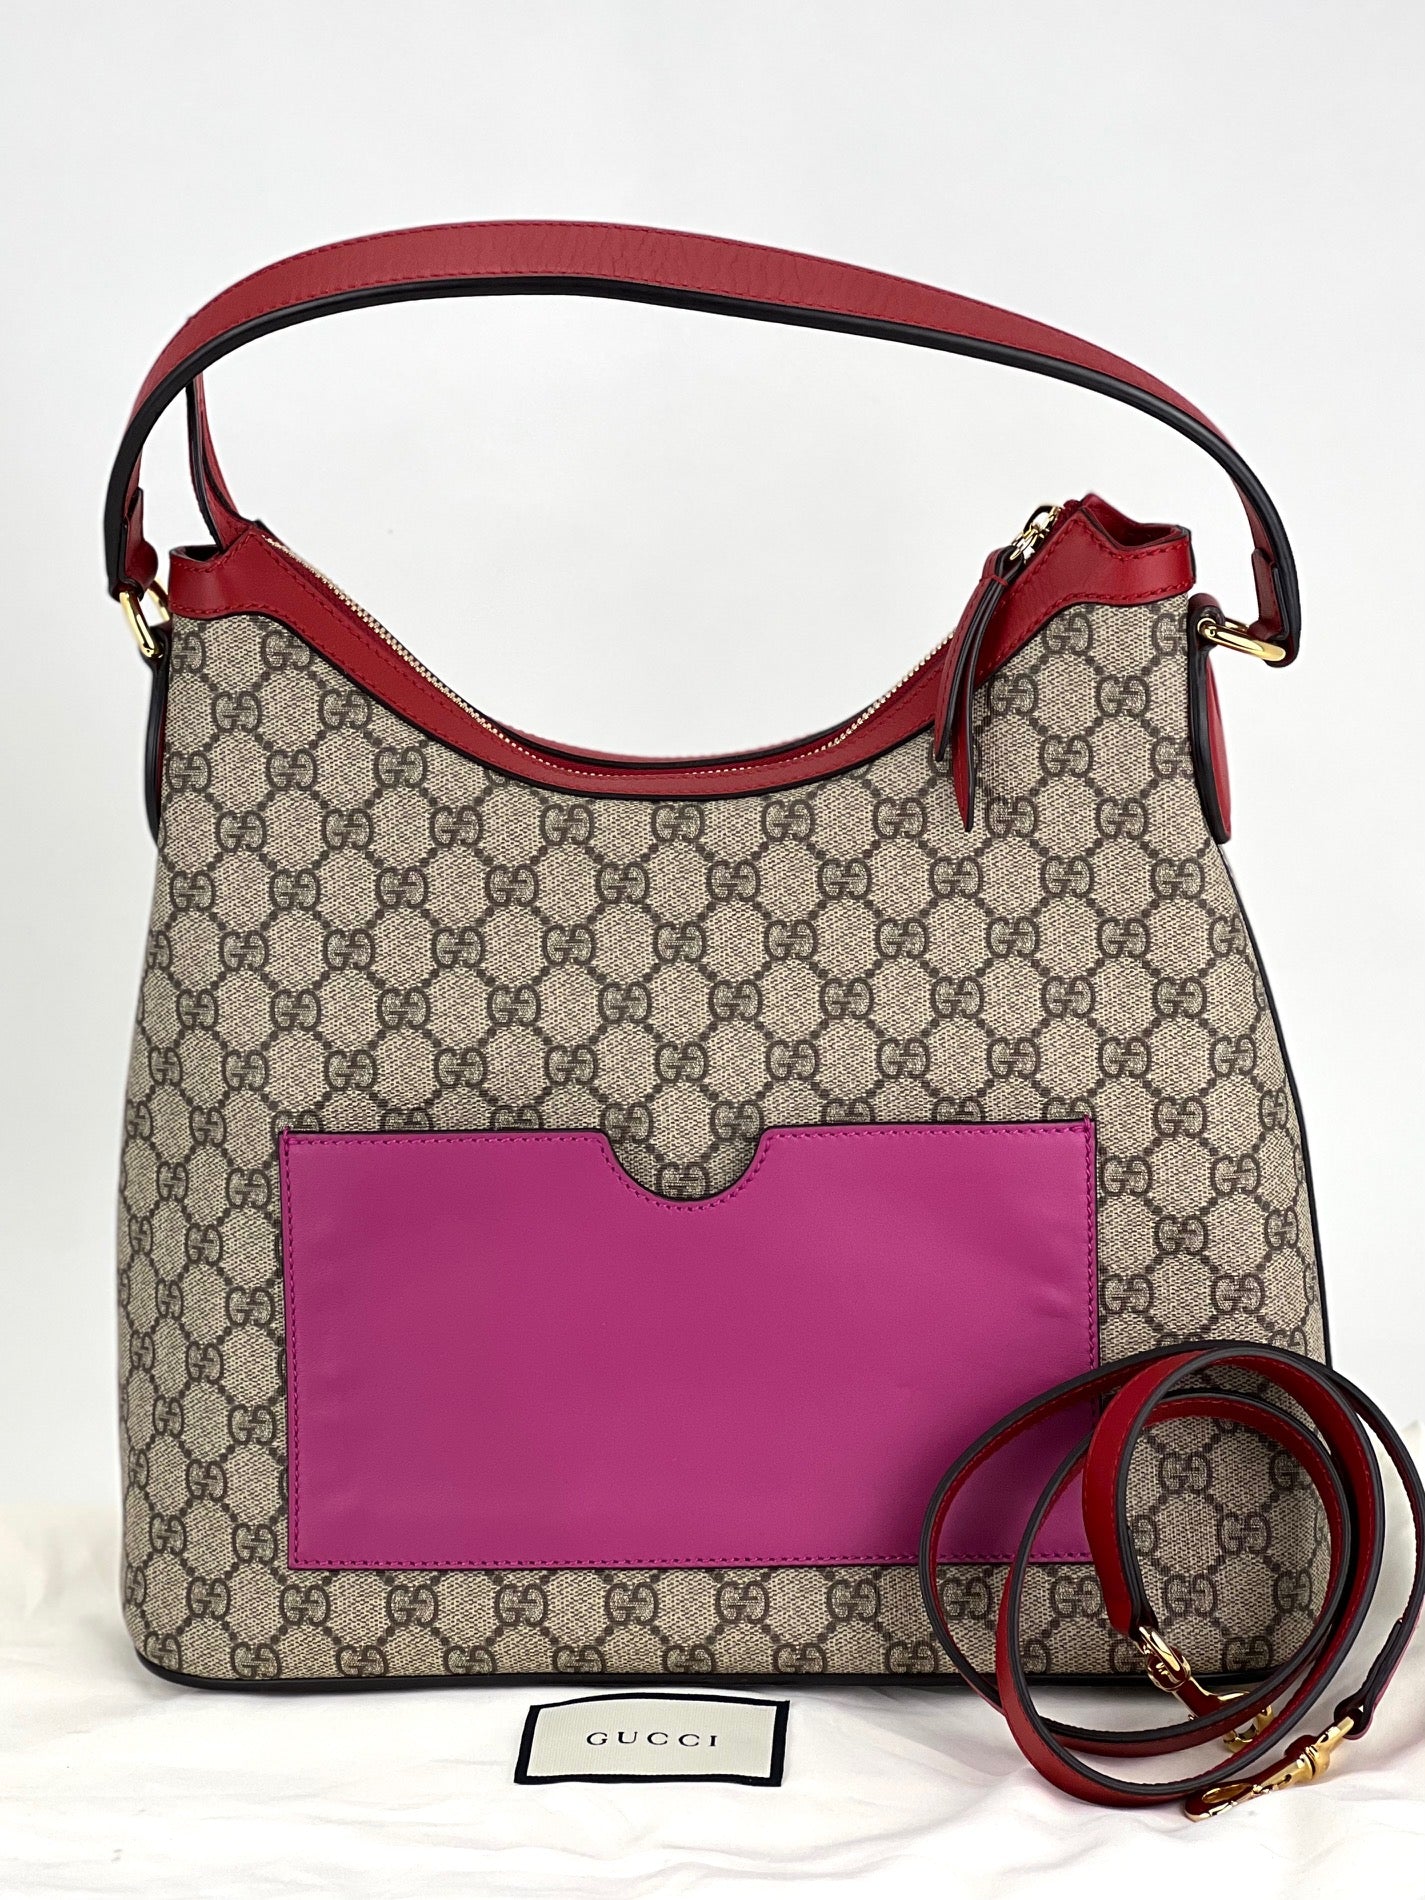 Gucci Jackie Bag in Red GG Canvas